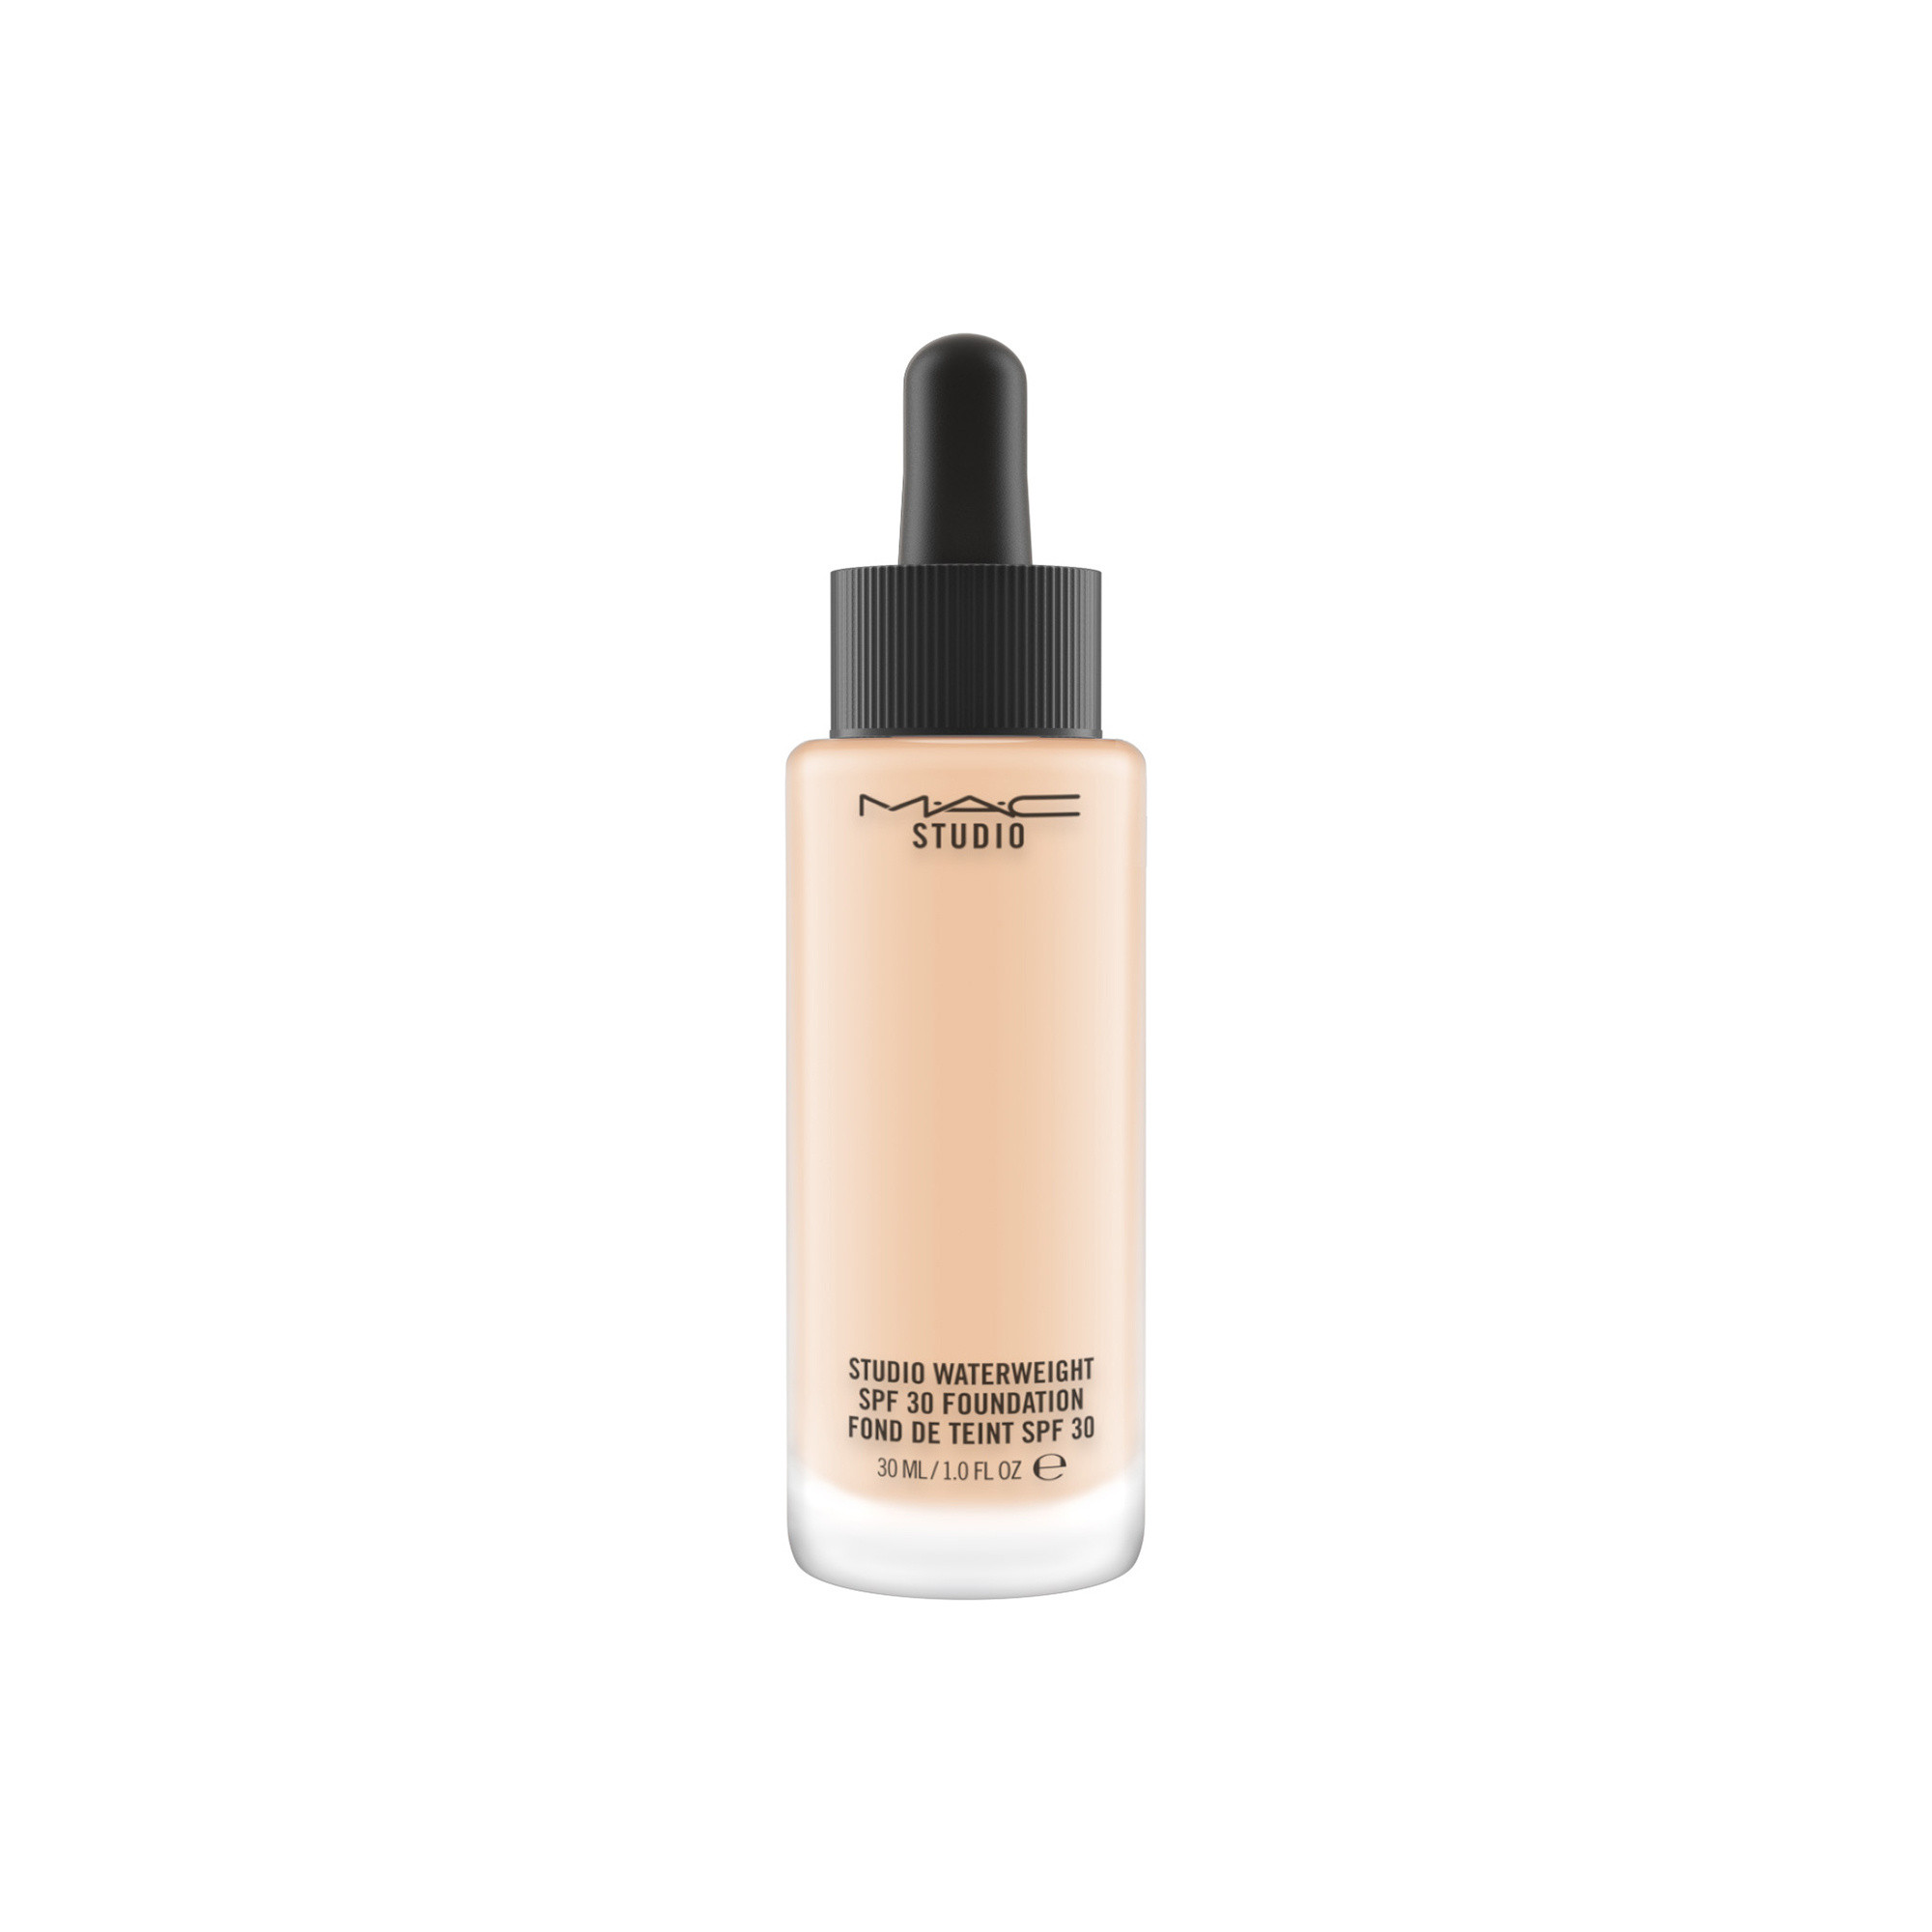 Studio Waterweight Foundation Spf30 - NC15, NC15, large image number 1